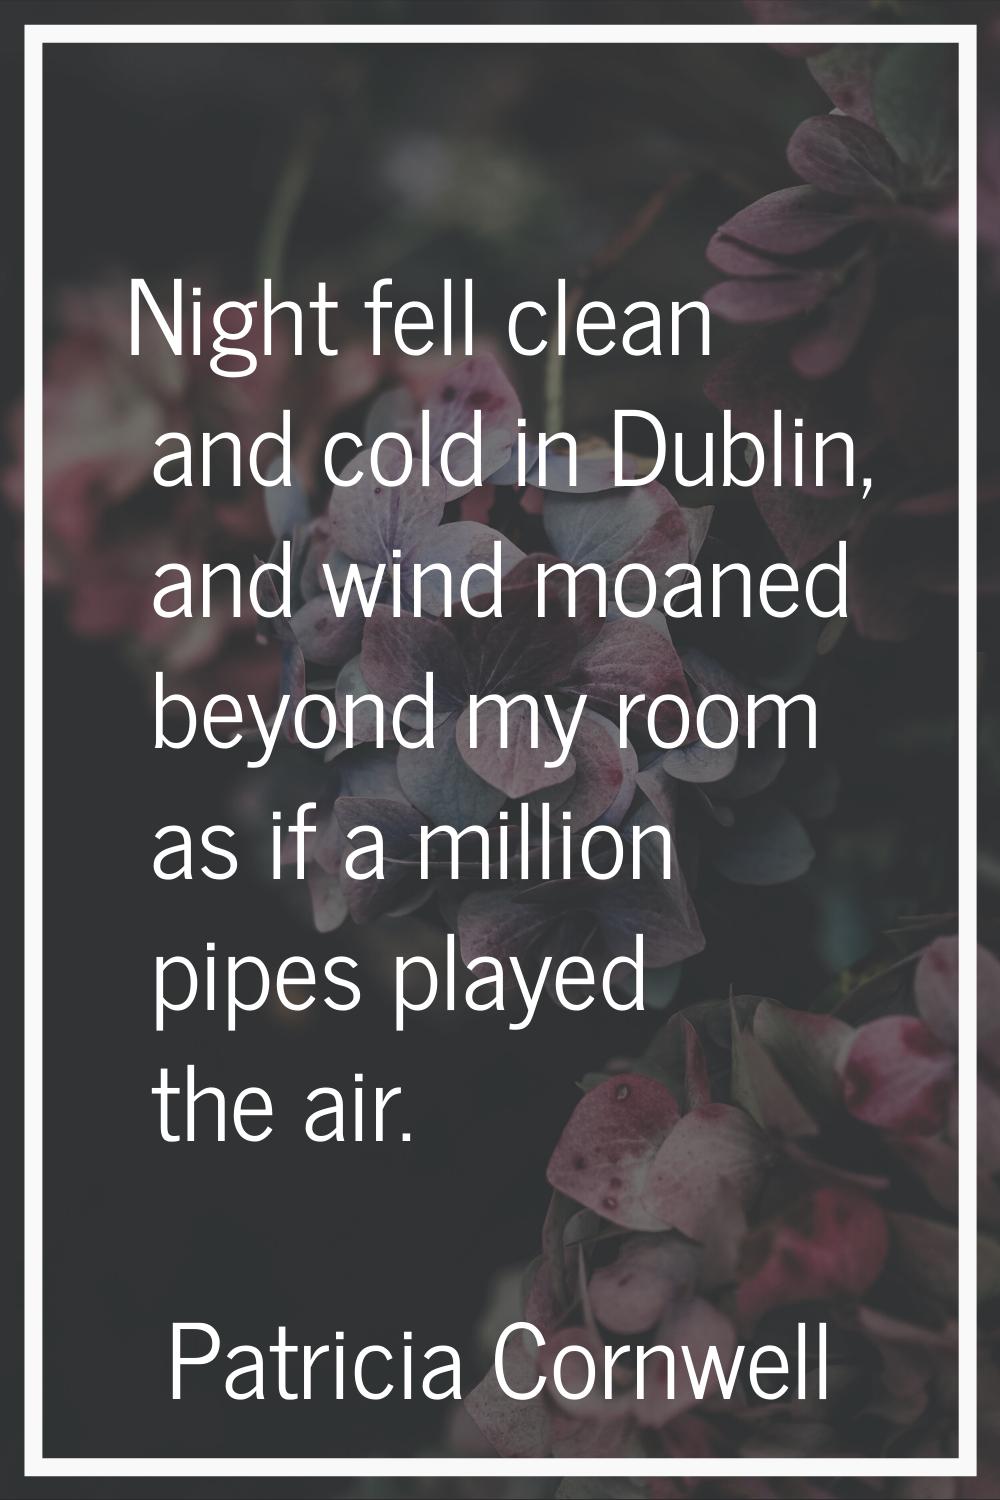 Night fell clean and cold in Dublin, and wind moaned beyond my room as if a million pipes played th